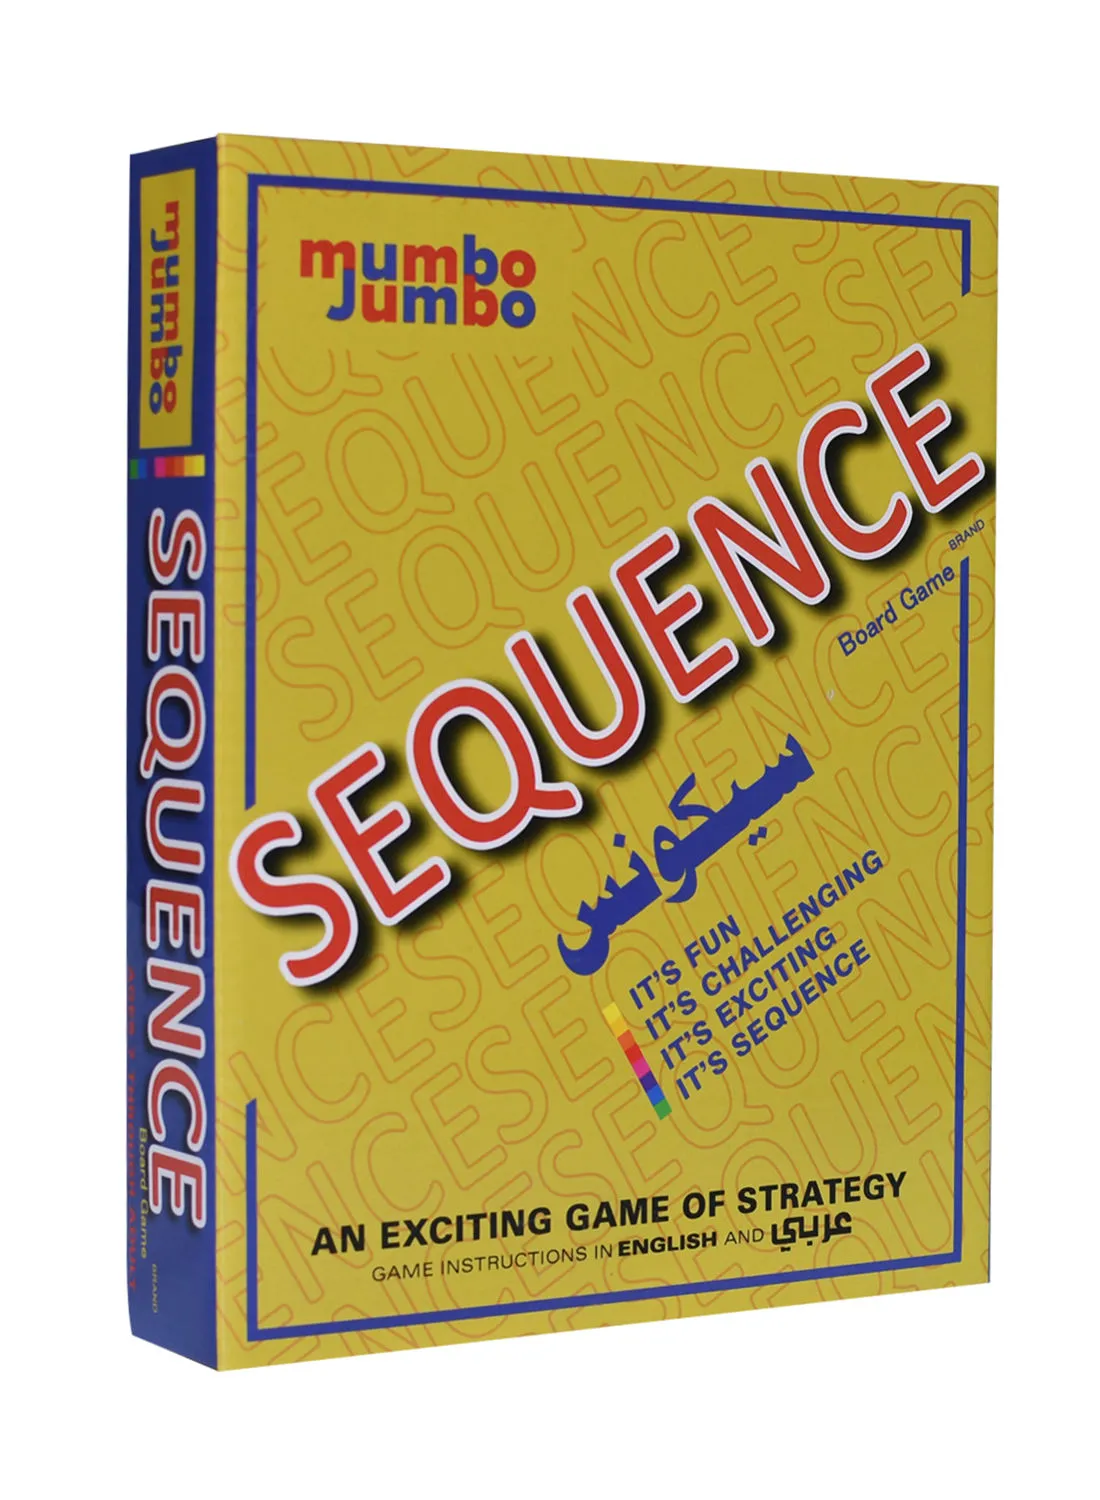 mumbo Jumbo Finest Quality Number Sequence Board Game, An Exciting Game Of Strategy For Kids 7 Years And Above With Guiding Manual 2 Players